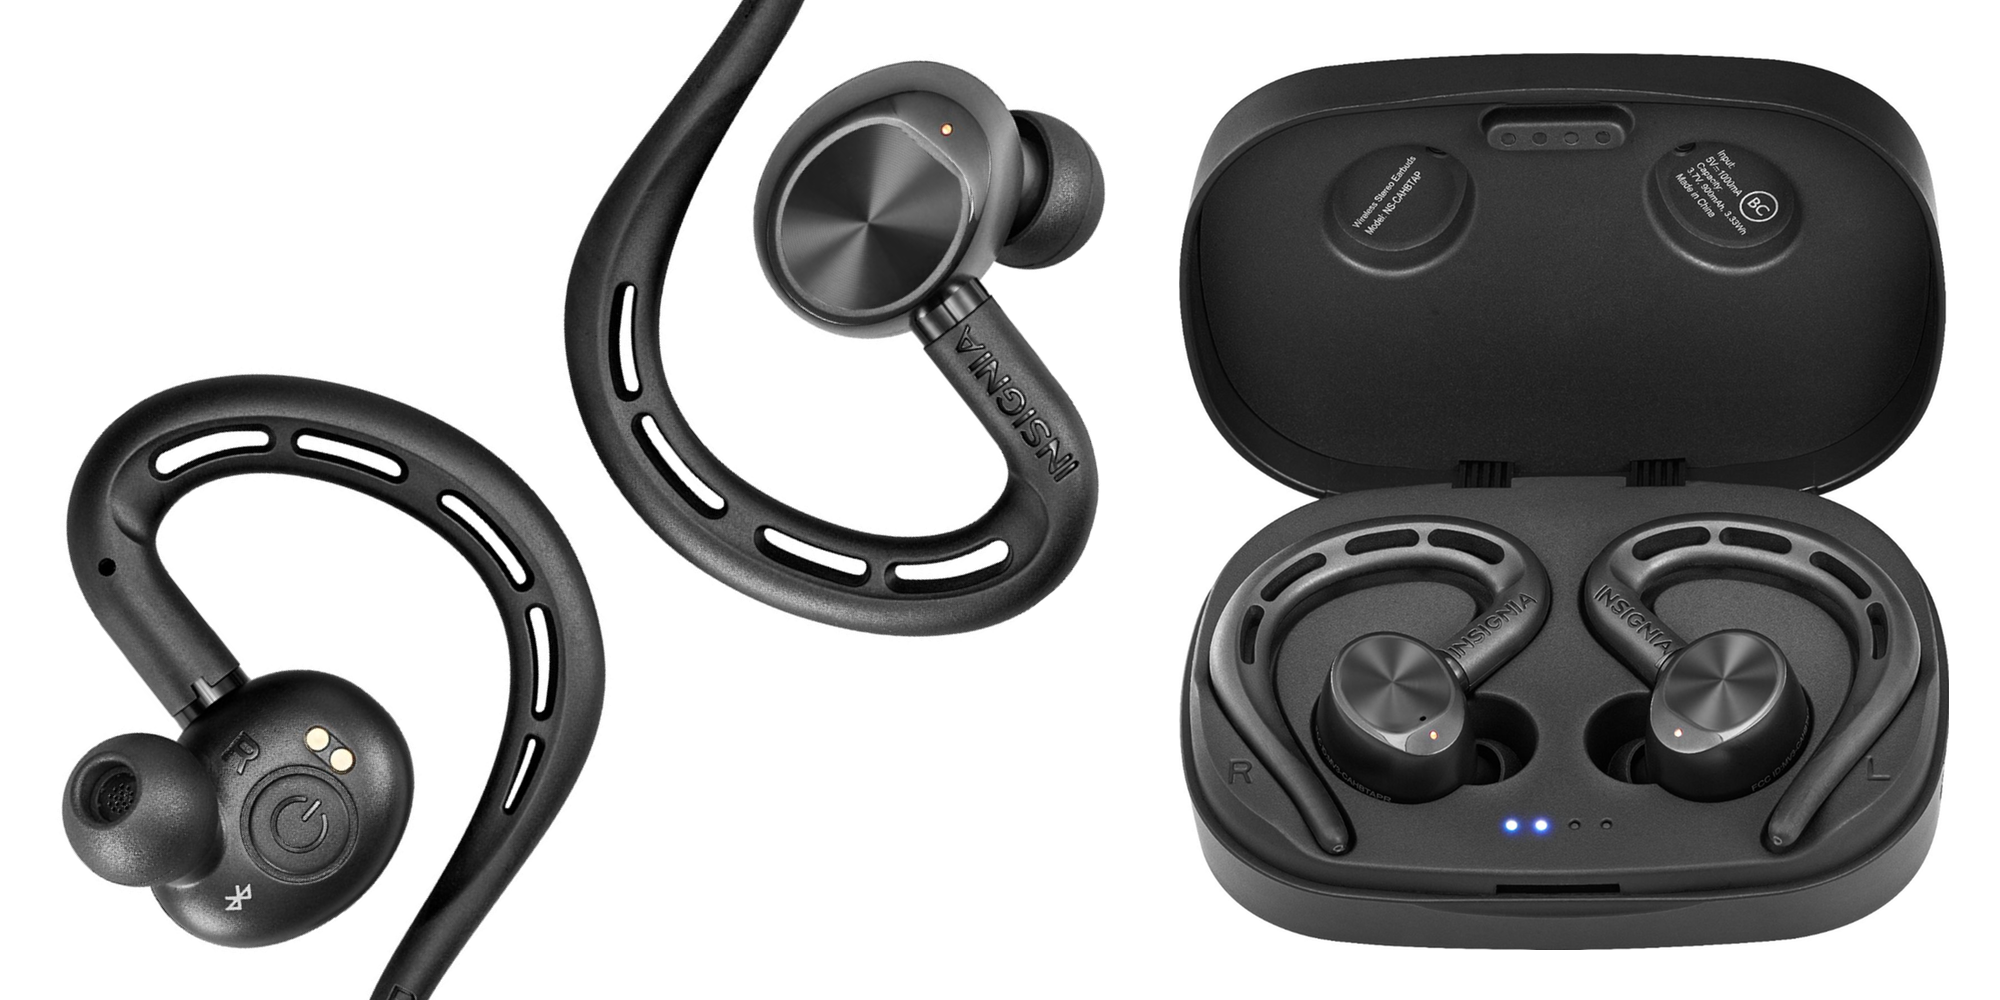 Insignia True Wireless Bluetooth Earbuds get first price drop to $100